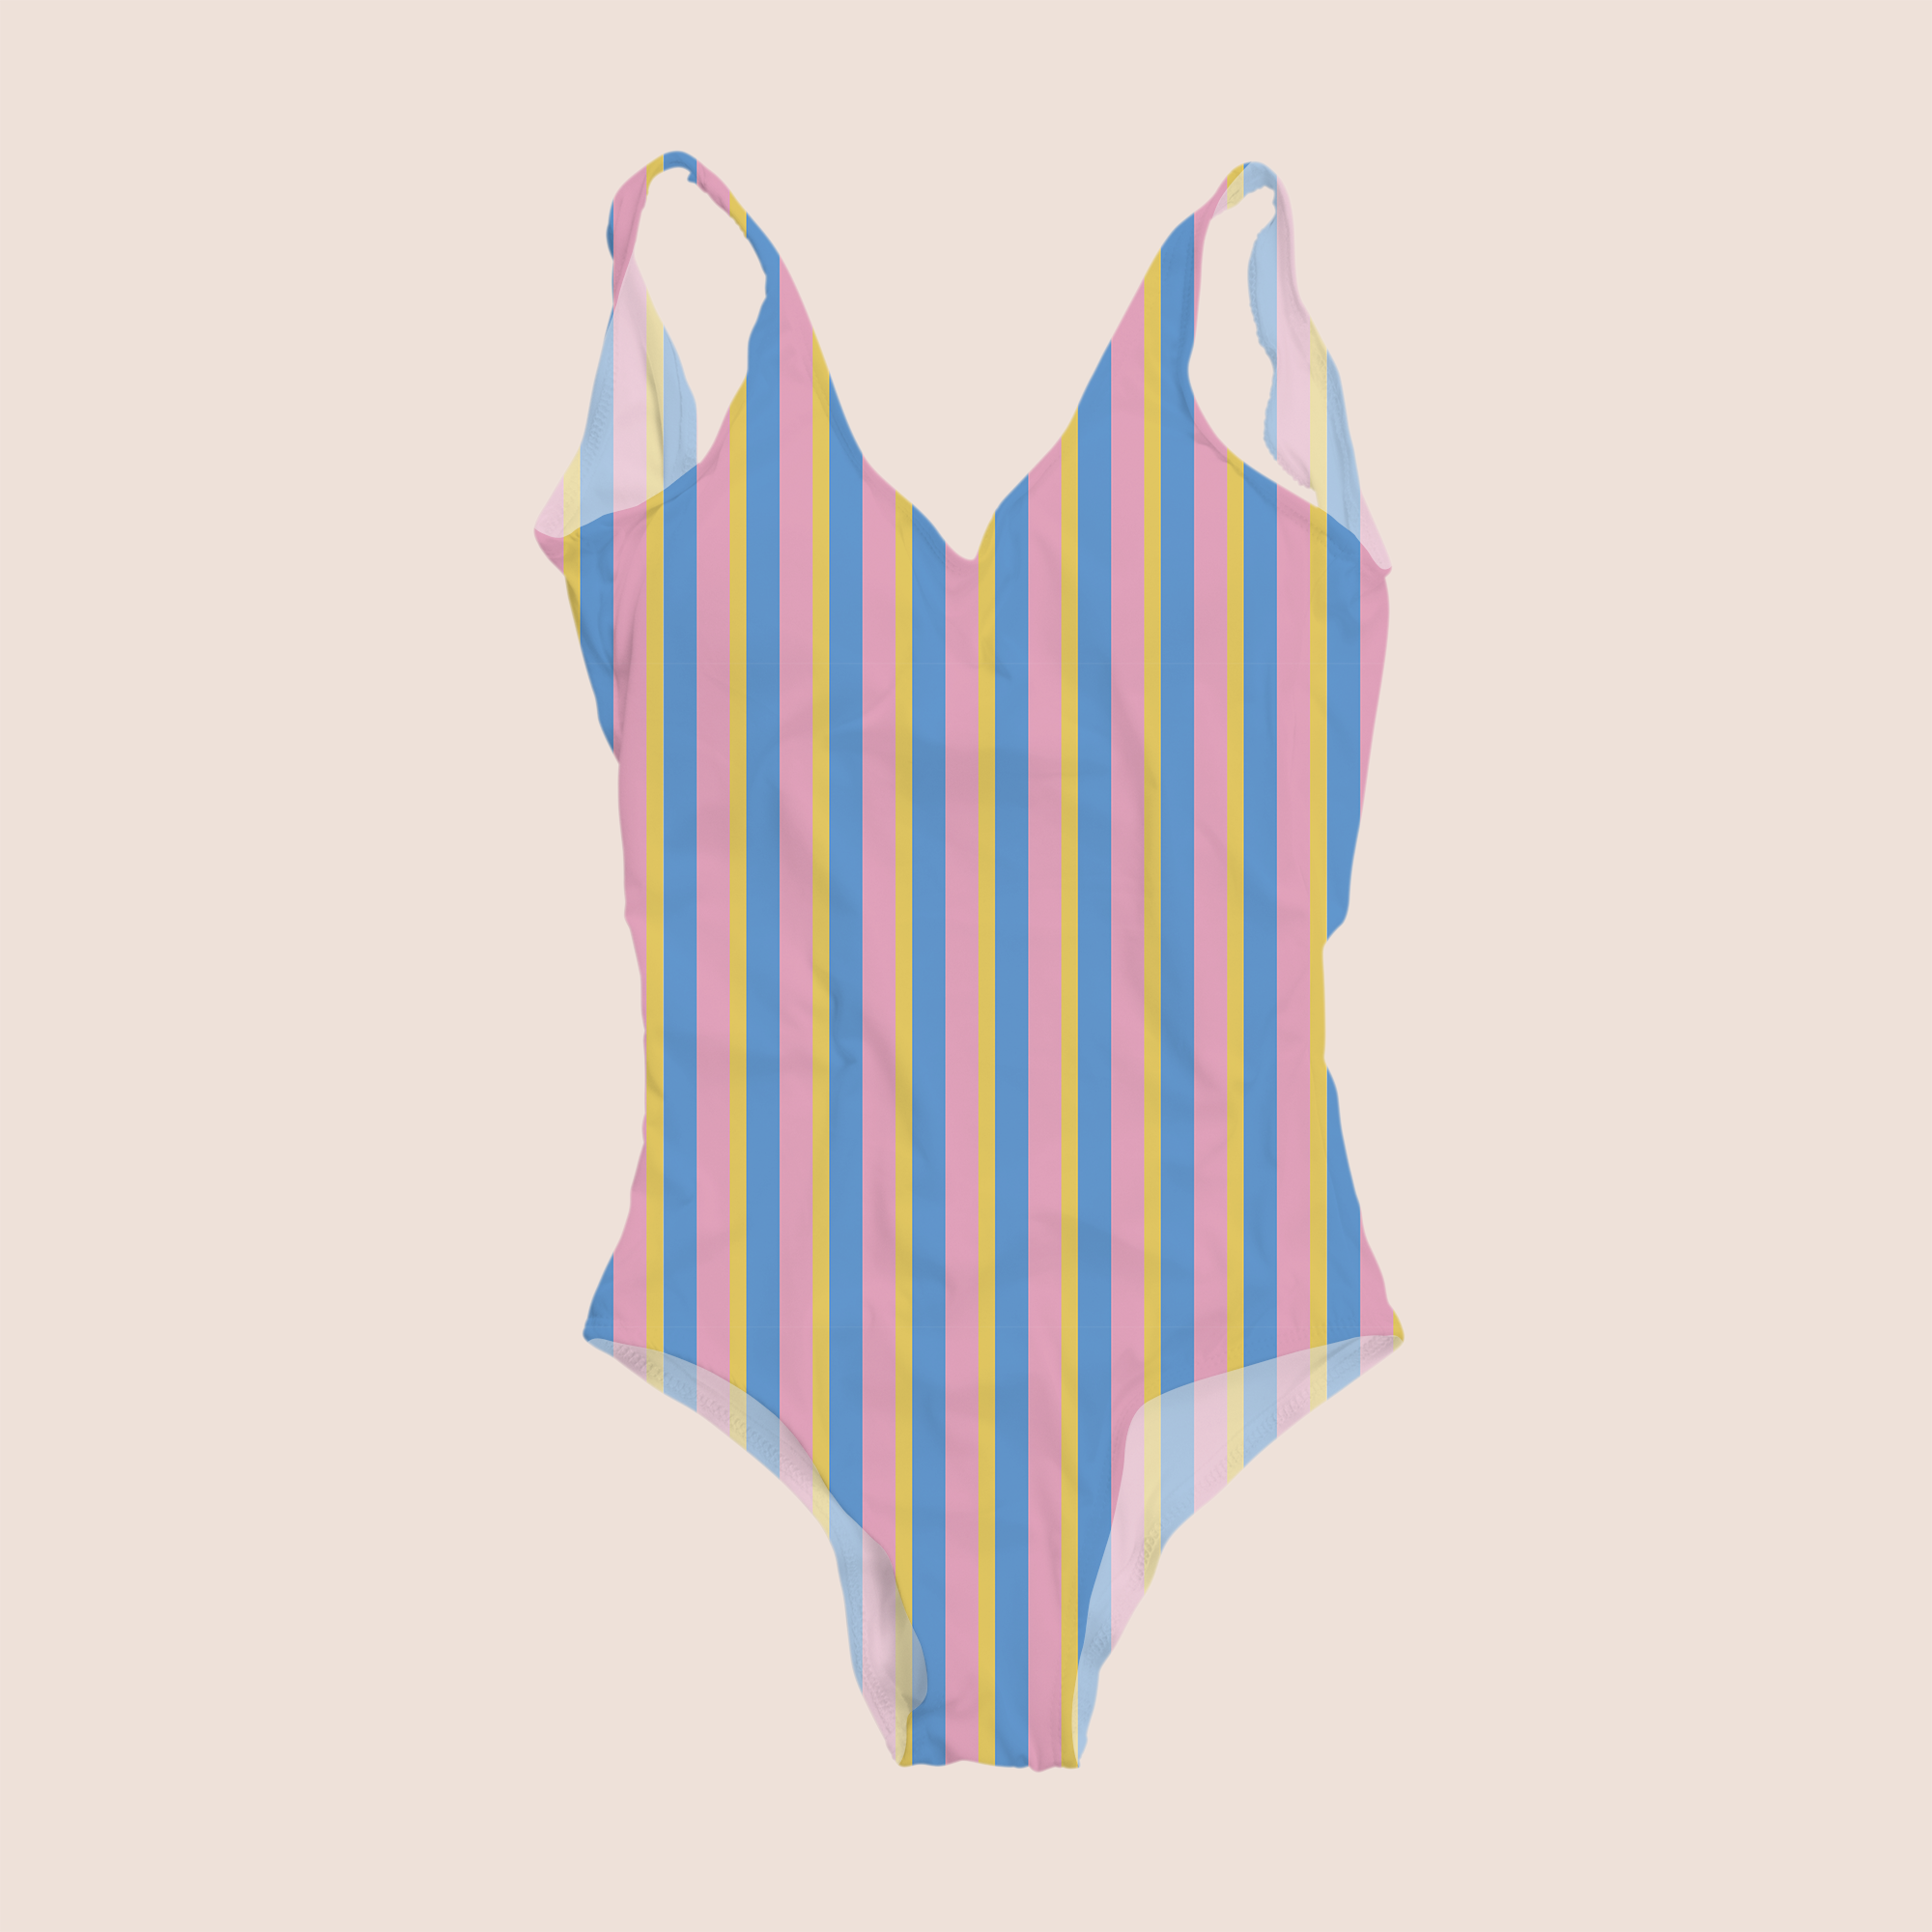 Coloured stripes version IV in pink pattern design printed on recycled fabric lycra mockup